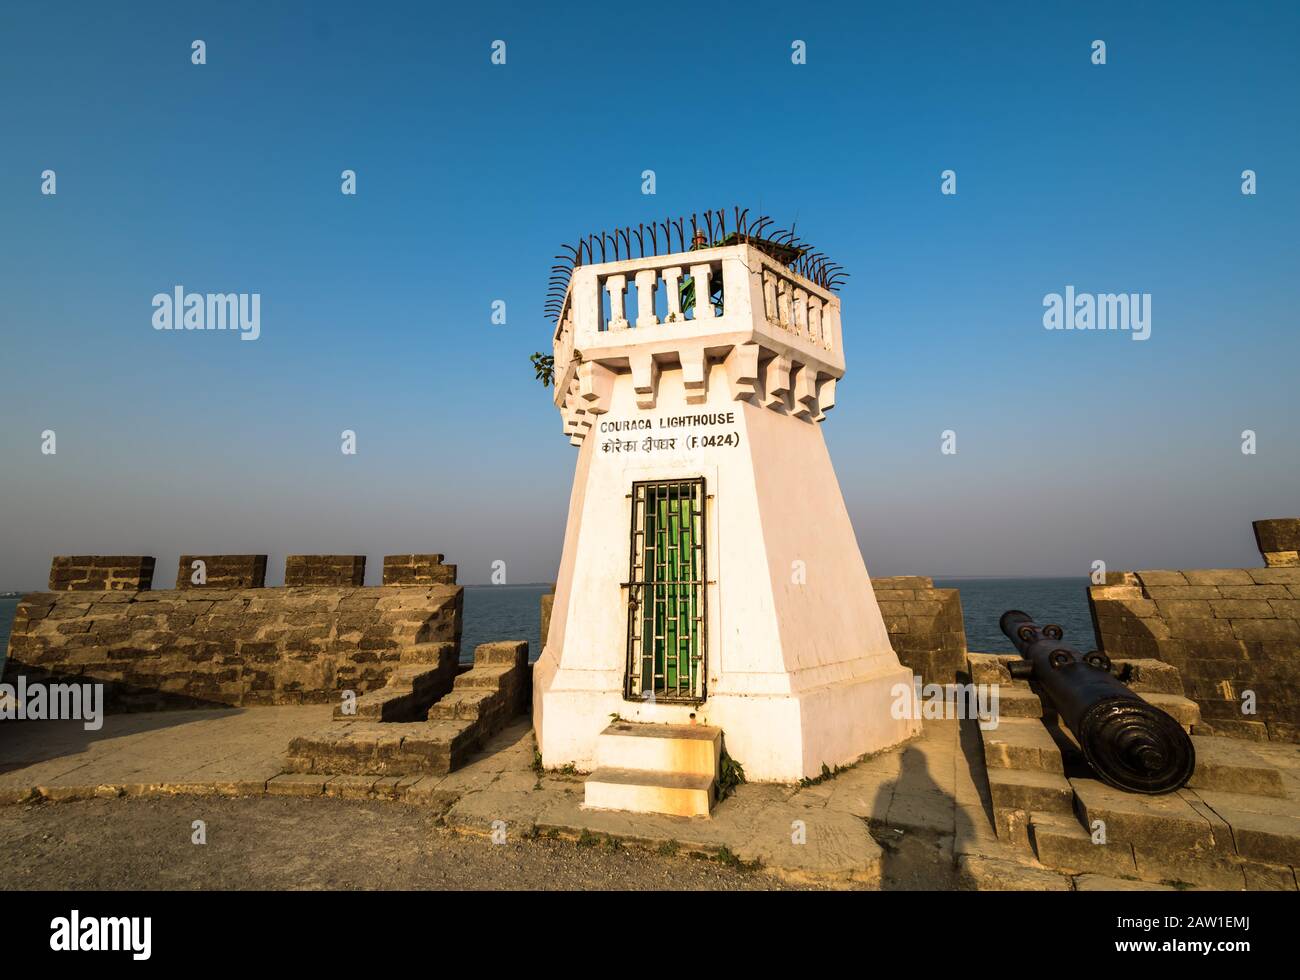 Diu, India - December 2018: The old whitewashed Couraca lighthouse inside the ancient, Portuguese built fort in the island of Diu. Stock Photo